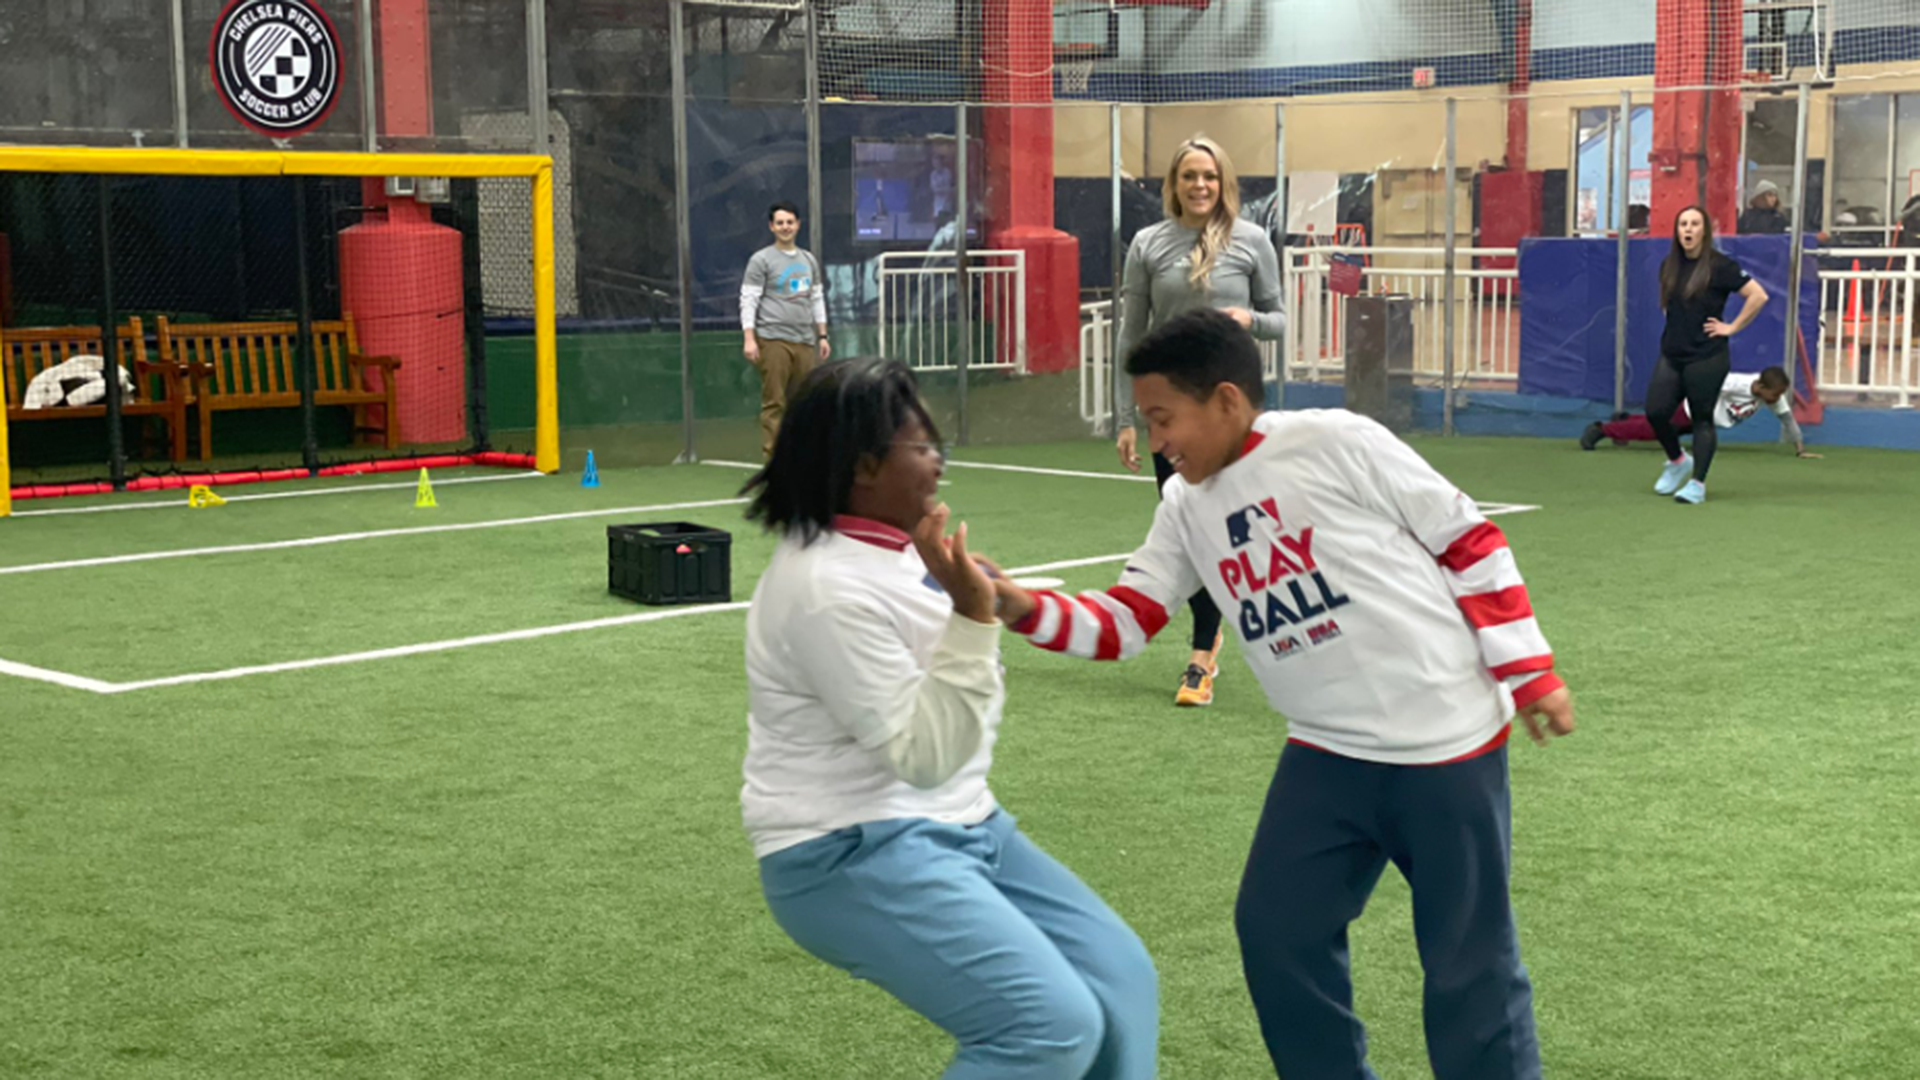 Jennie Finch mentoring young kids at Chelsea Piers